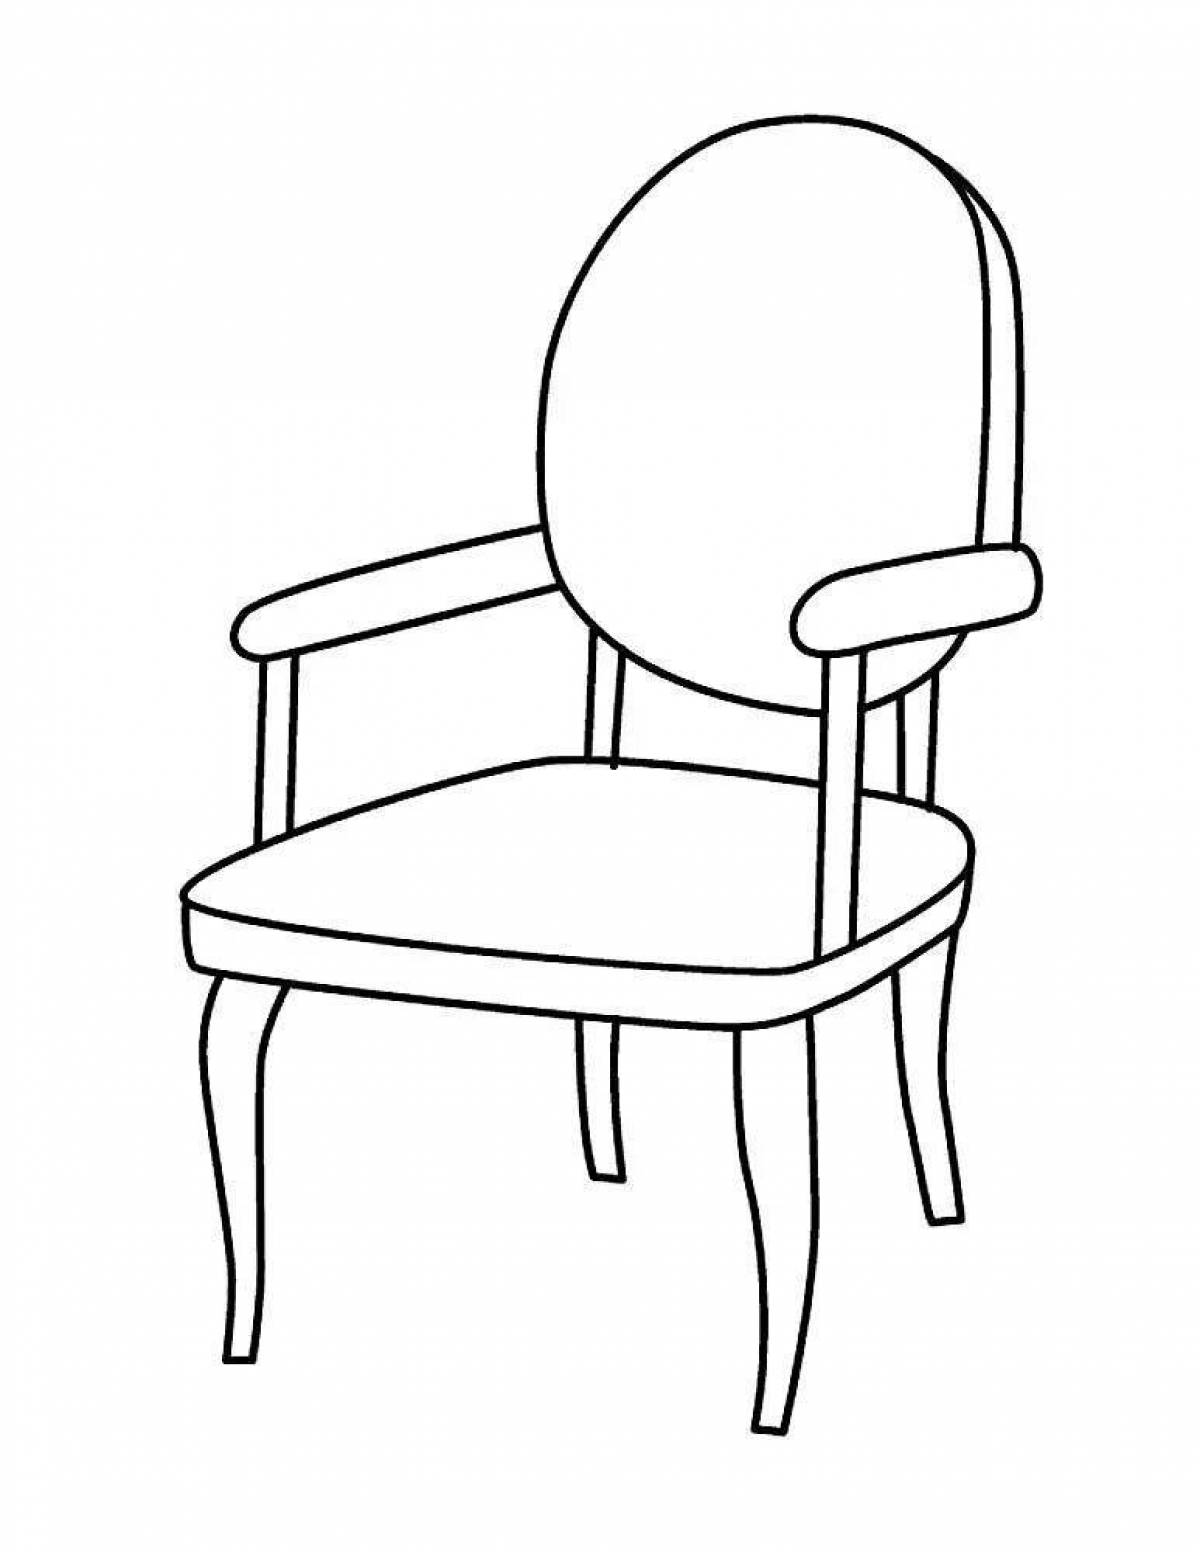 Coloring for a fashionable chair for children